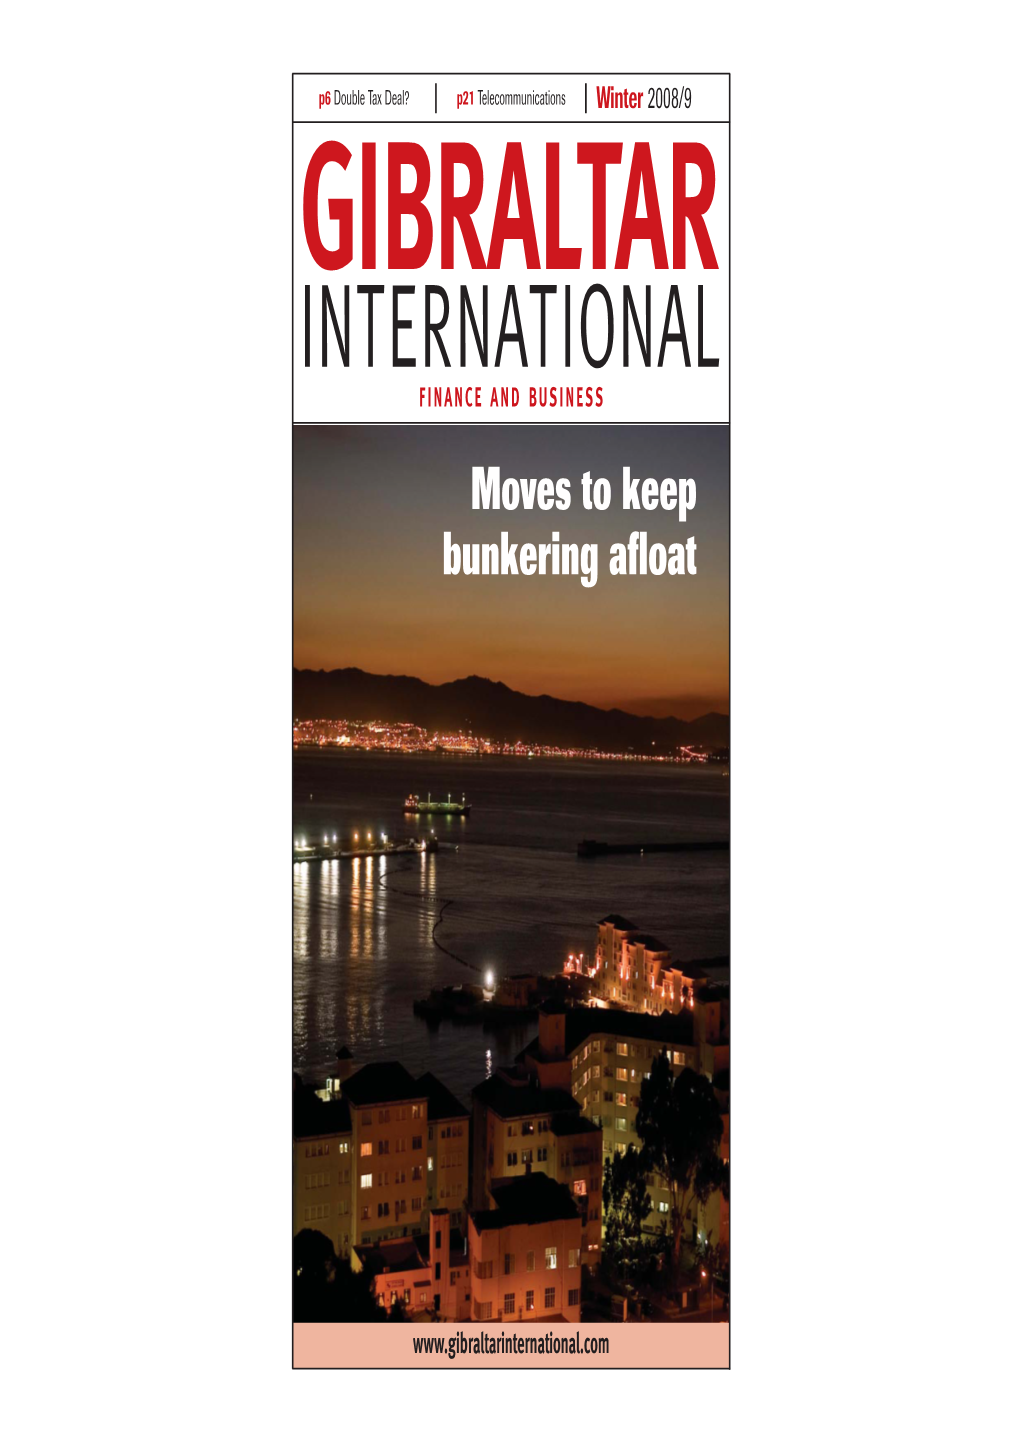 GIBRALTAR INTERNATIONAL FINANCE and BUSINESS Moves to Keep Bunkering Afloat